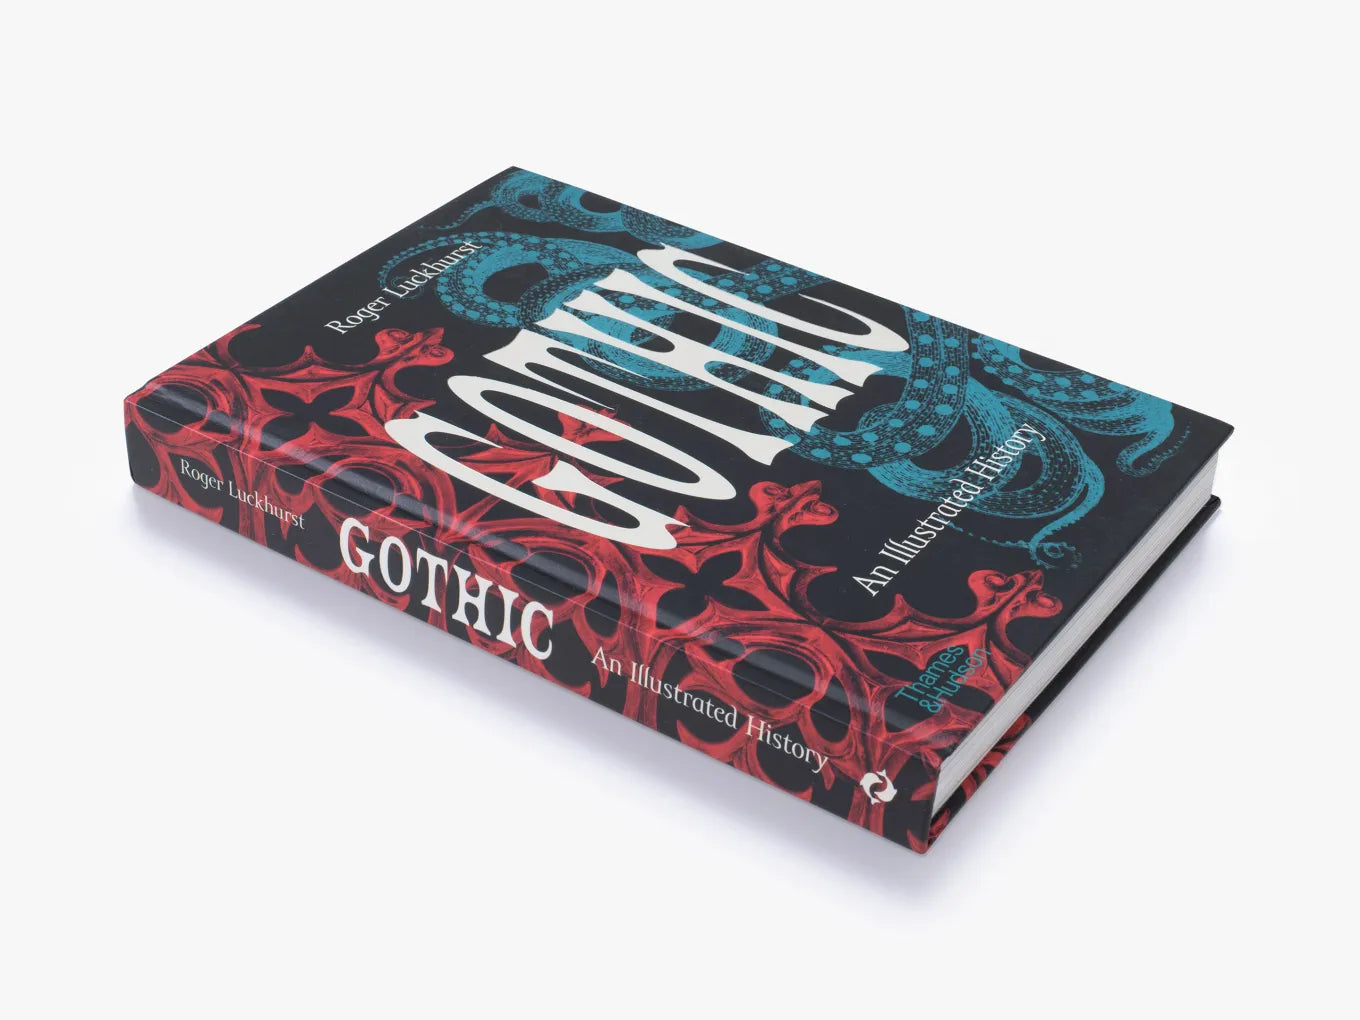 Gothic. An Illustrated History